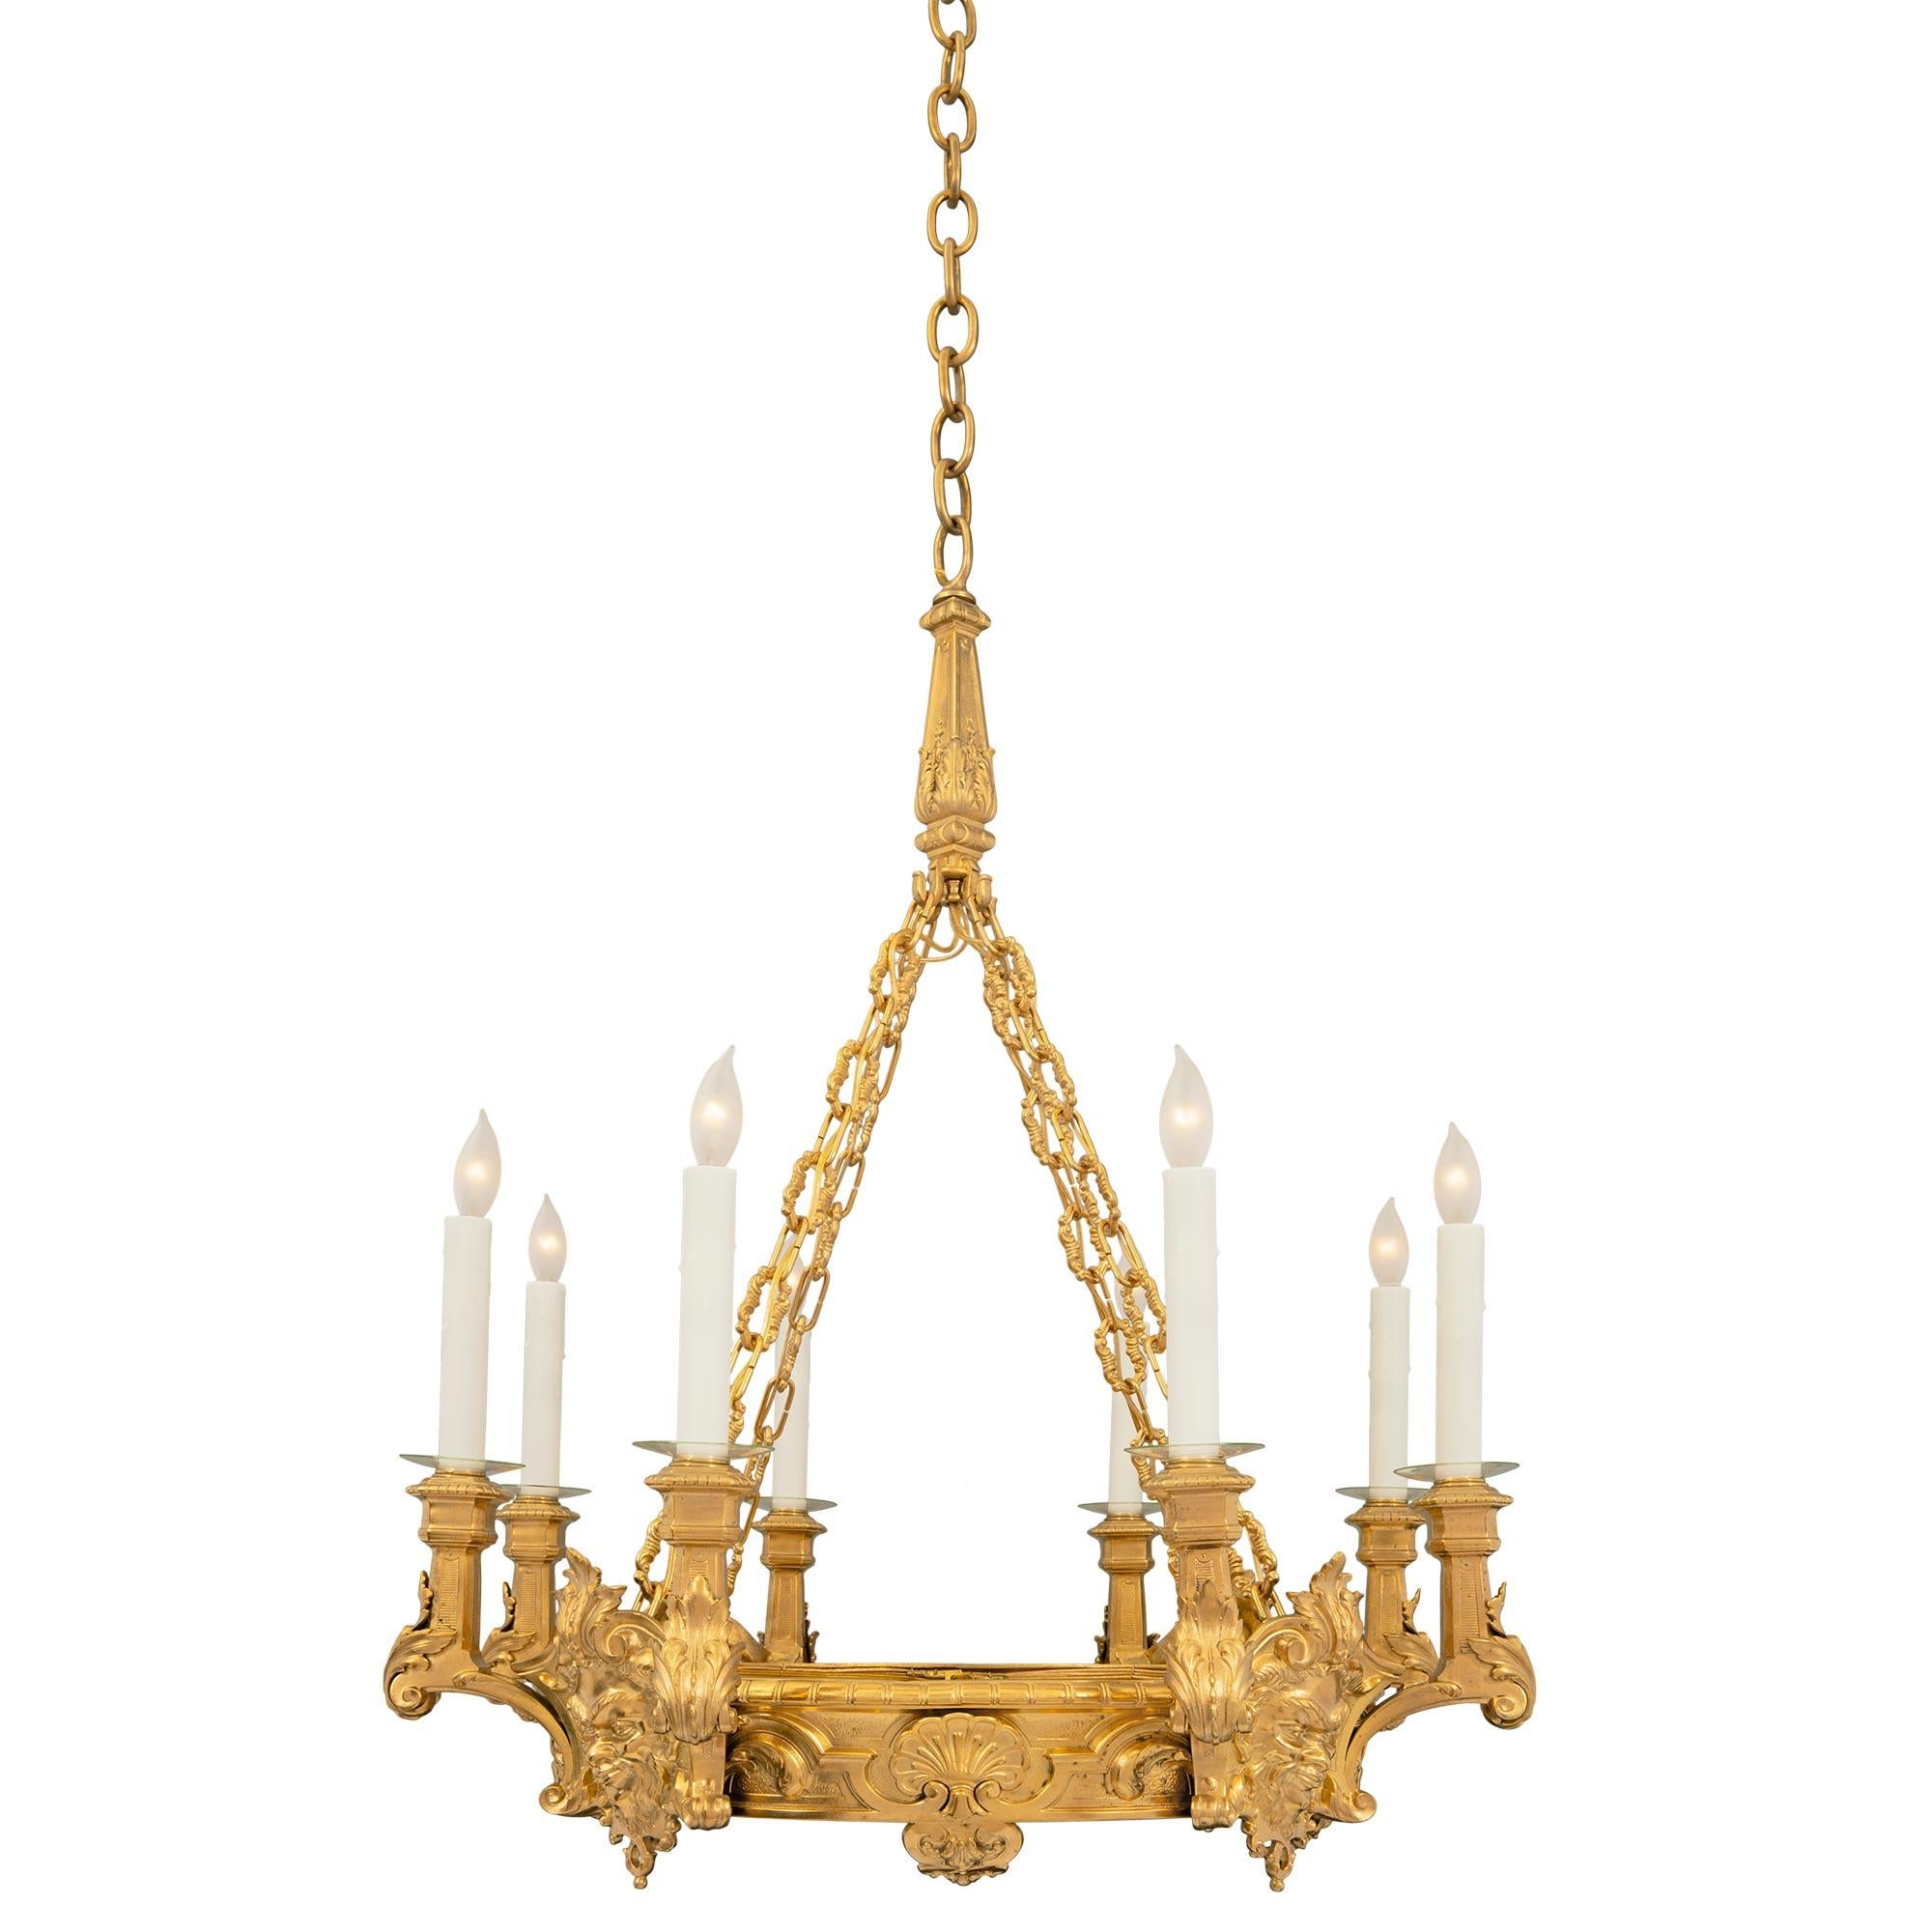 A handsome French mid 19th century Renaissance st. ormolu eight arm, twelve light chandelier. The chandelier is centered by a beautiful circular fitted onyx plateau through which the warm glow of the lighting inside can be seen. At the central tier